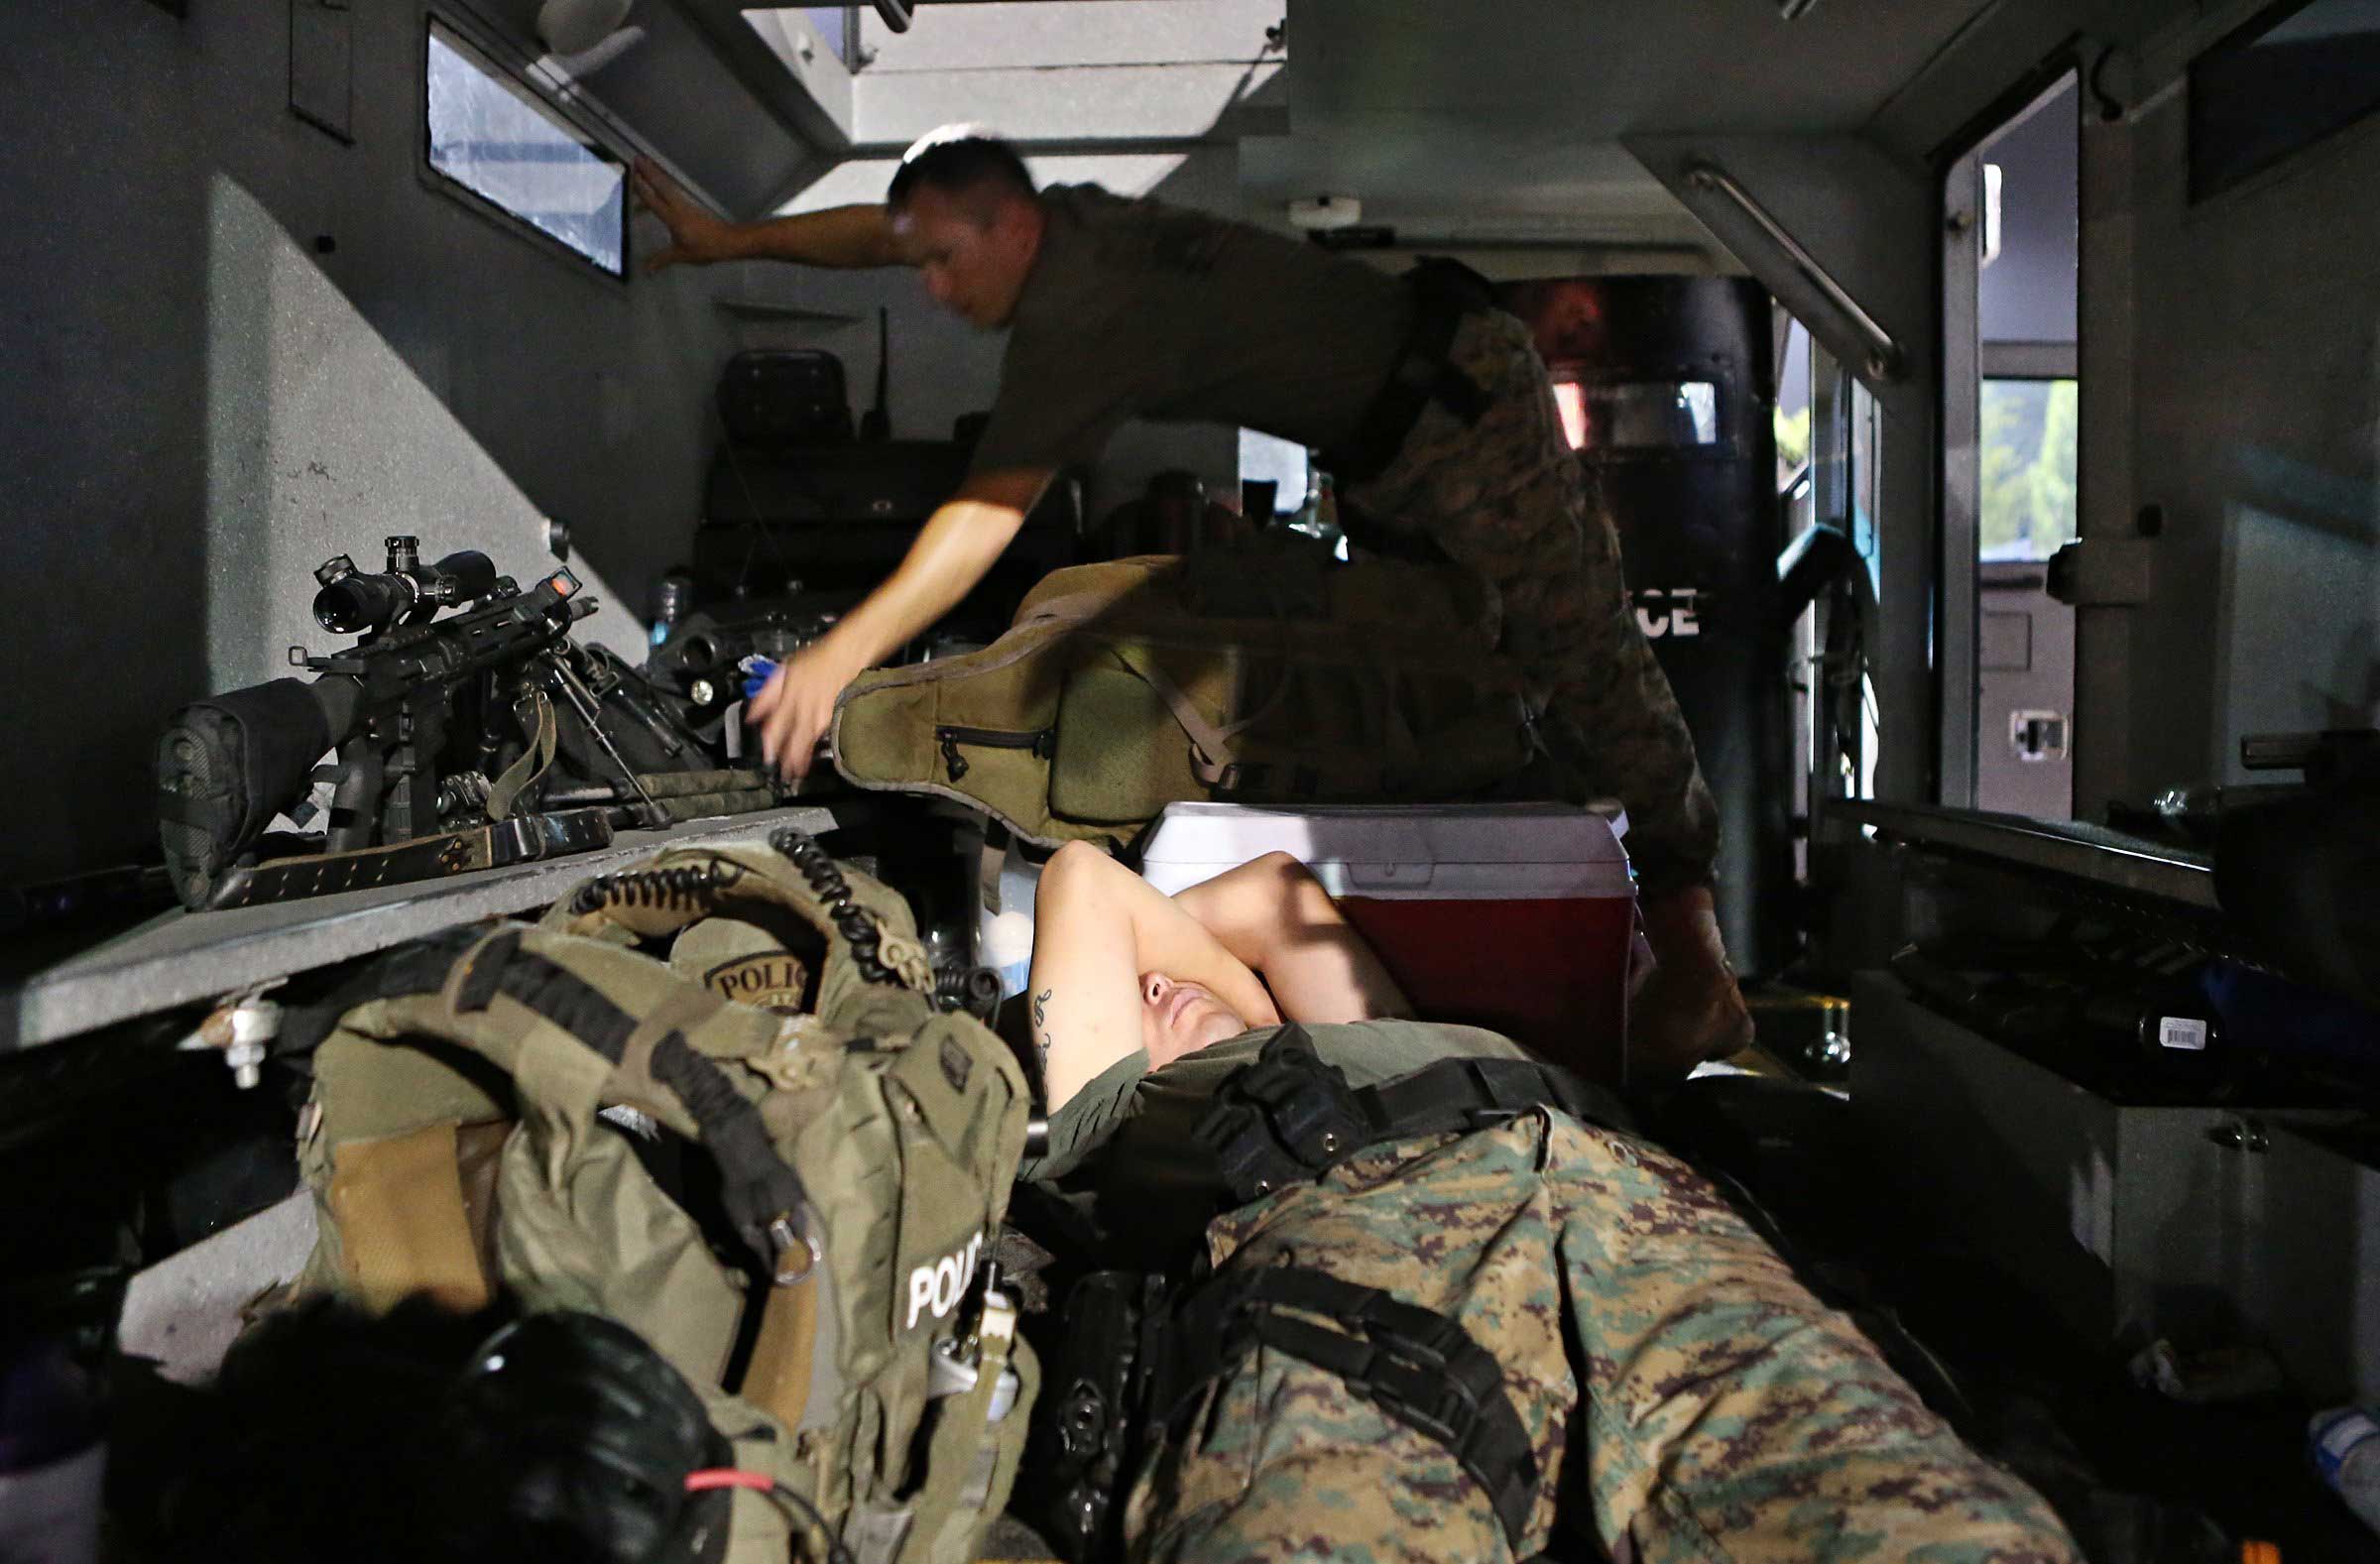 Aug. 19, 2014. A member of the St. Louis County Police tactical team sleeps in the back of the team's armored truck after arriving back at the command post W. Florissant Avenue at about 2.49 a.m.